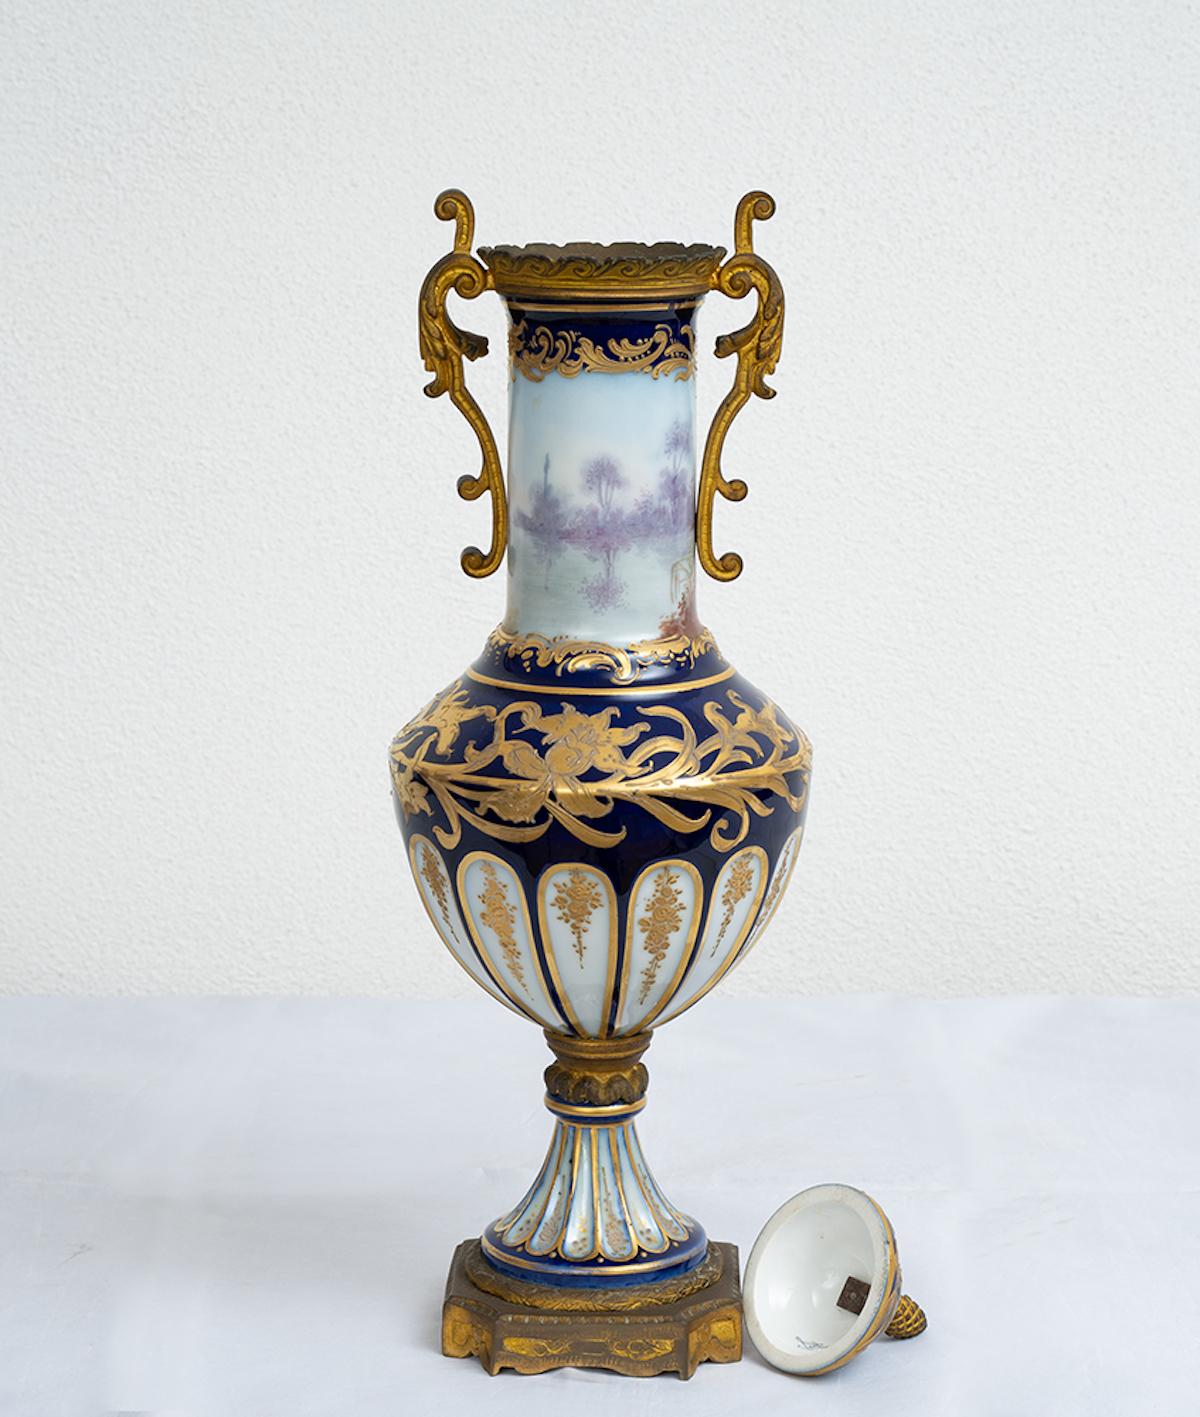 Antique French Napoleon III porcelain vase from Sevres 19th century For Sale 2